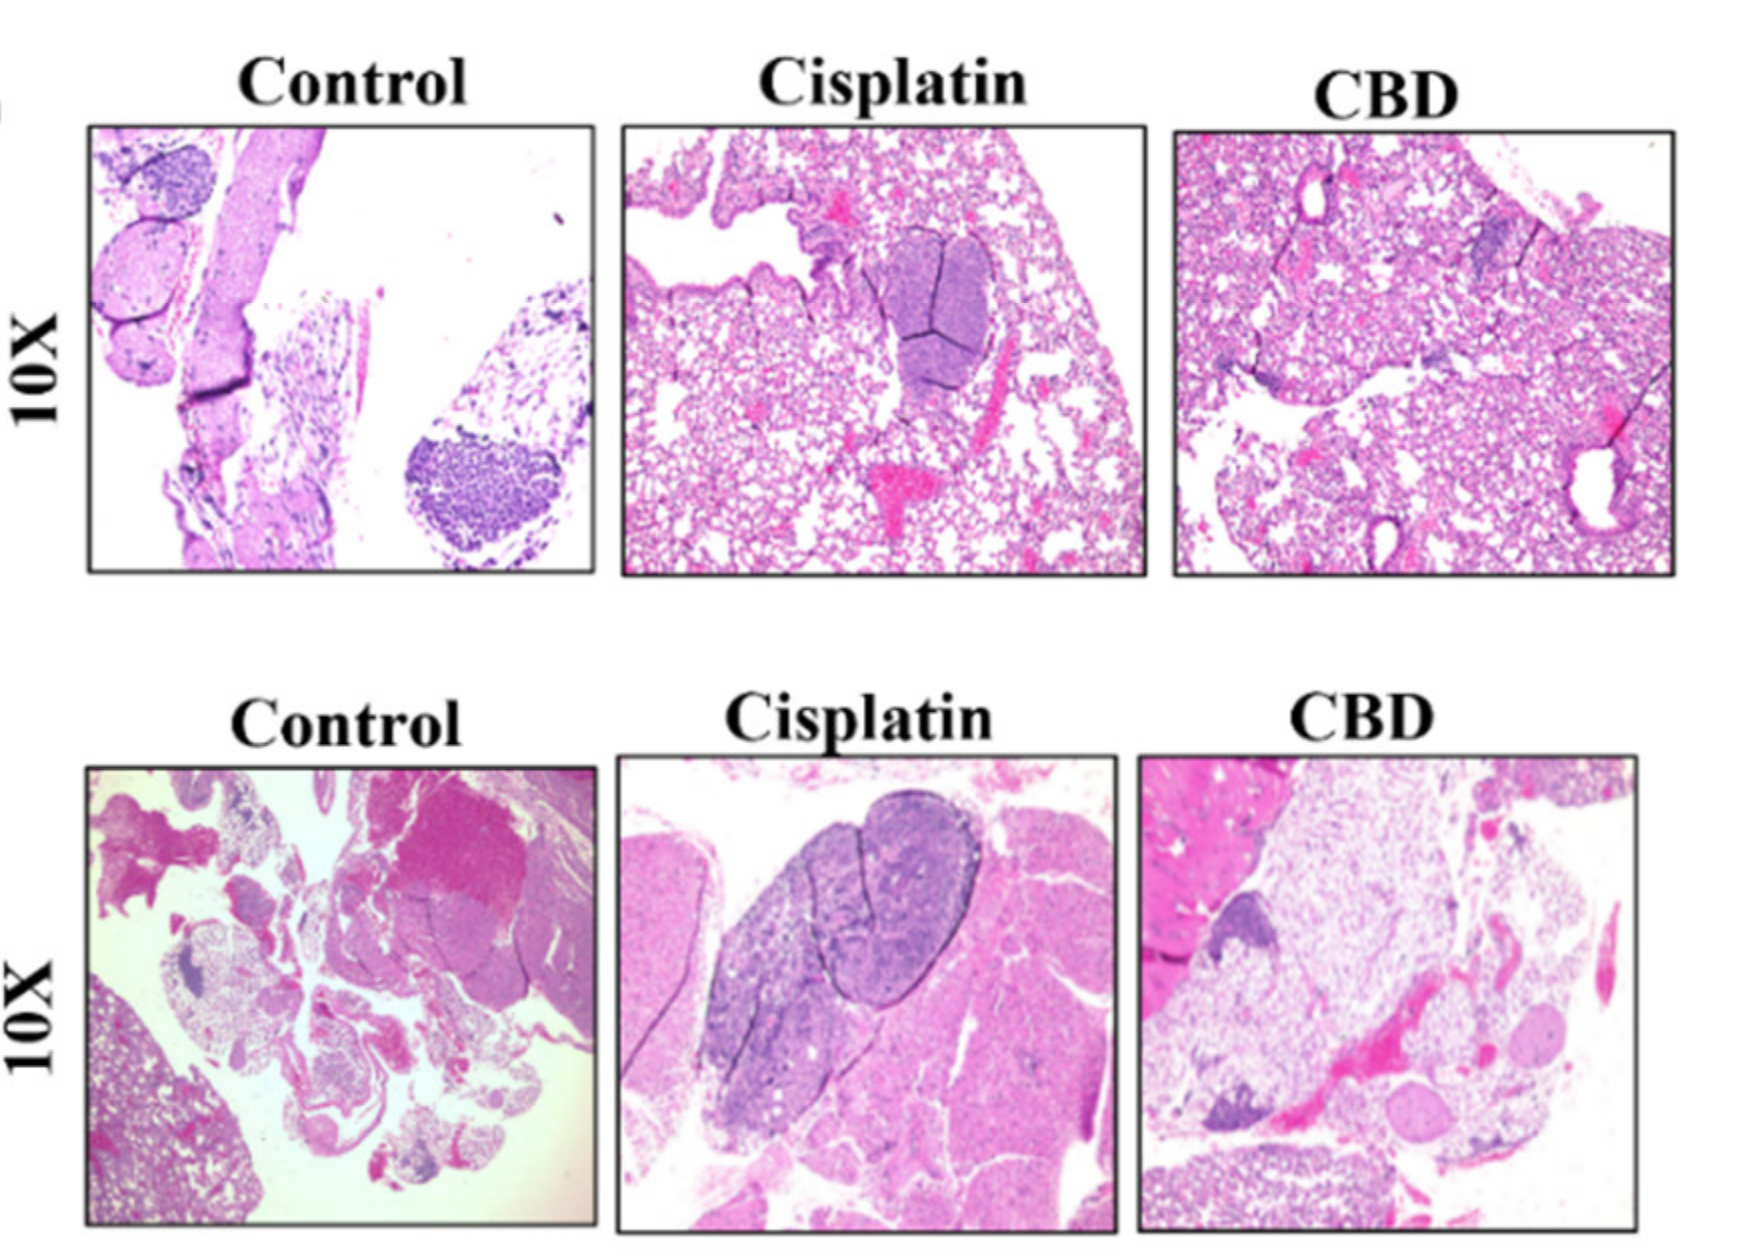 H&E staining of non-small cell lung tissue treated with a vehicle control, cipslatin, or CBD.